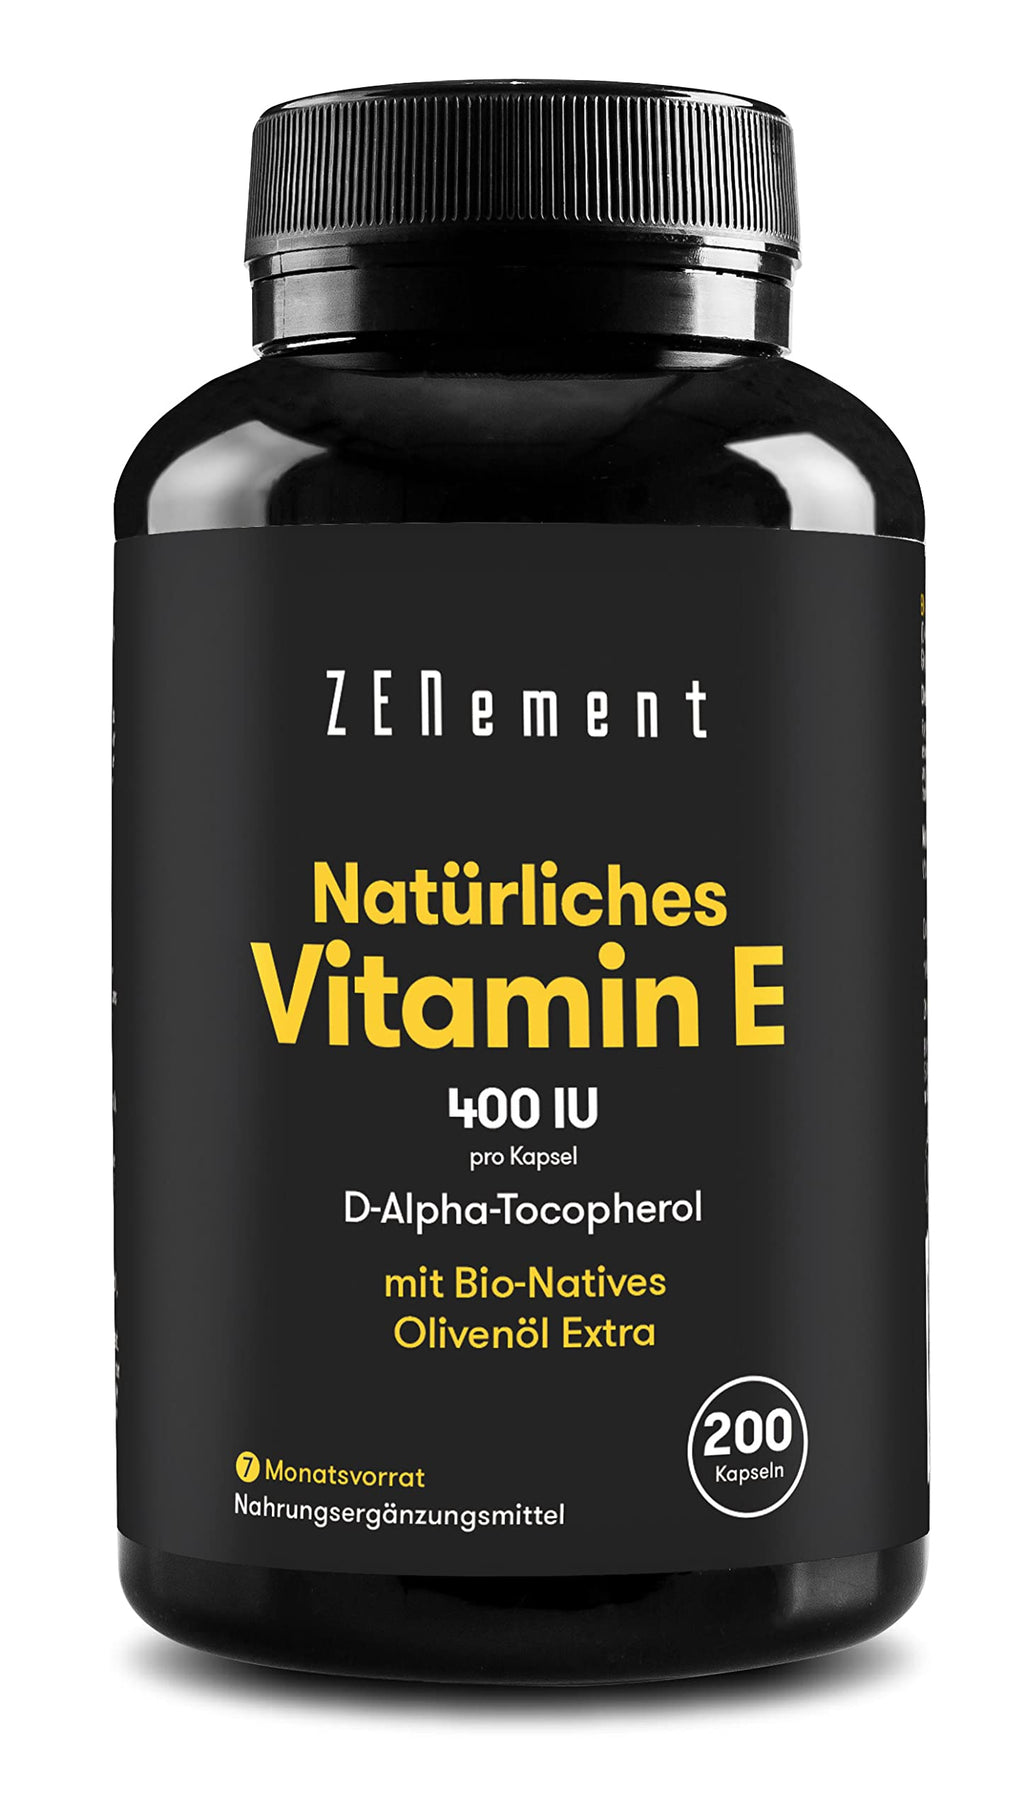 Natural vitamin E (D-alpha-tocopherol), 400 IU bioactive vitamin E per capsule | 200 Softgels With Organic Extra Virgin Olive Oil High Dose for 7 Months Supply | Laboratory tested | Zenement - NewNest Australia